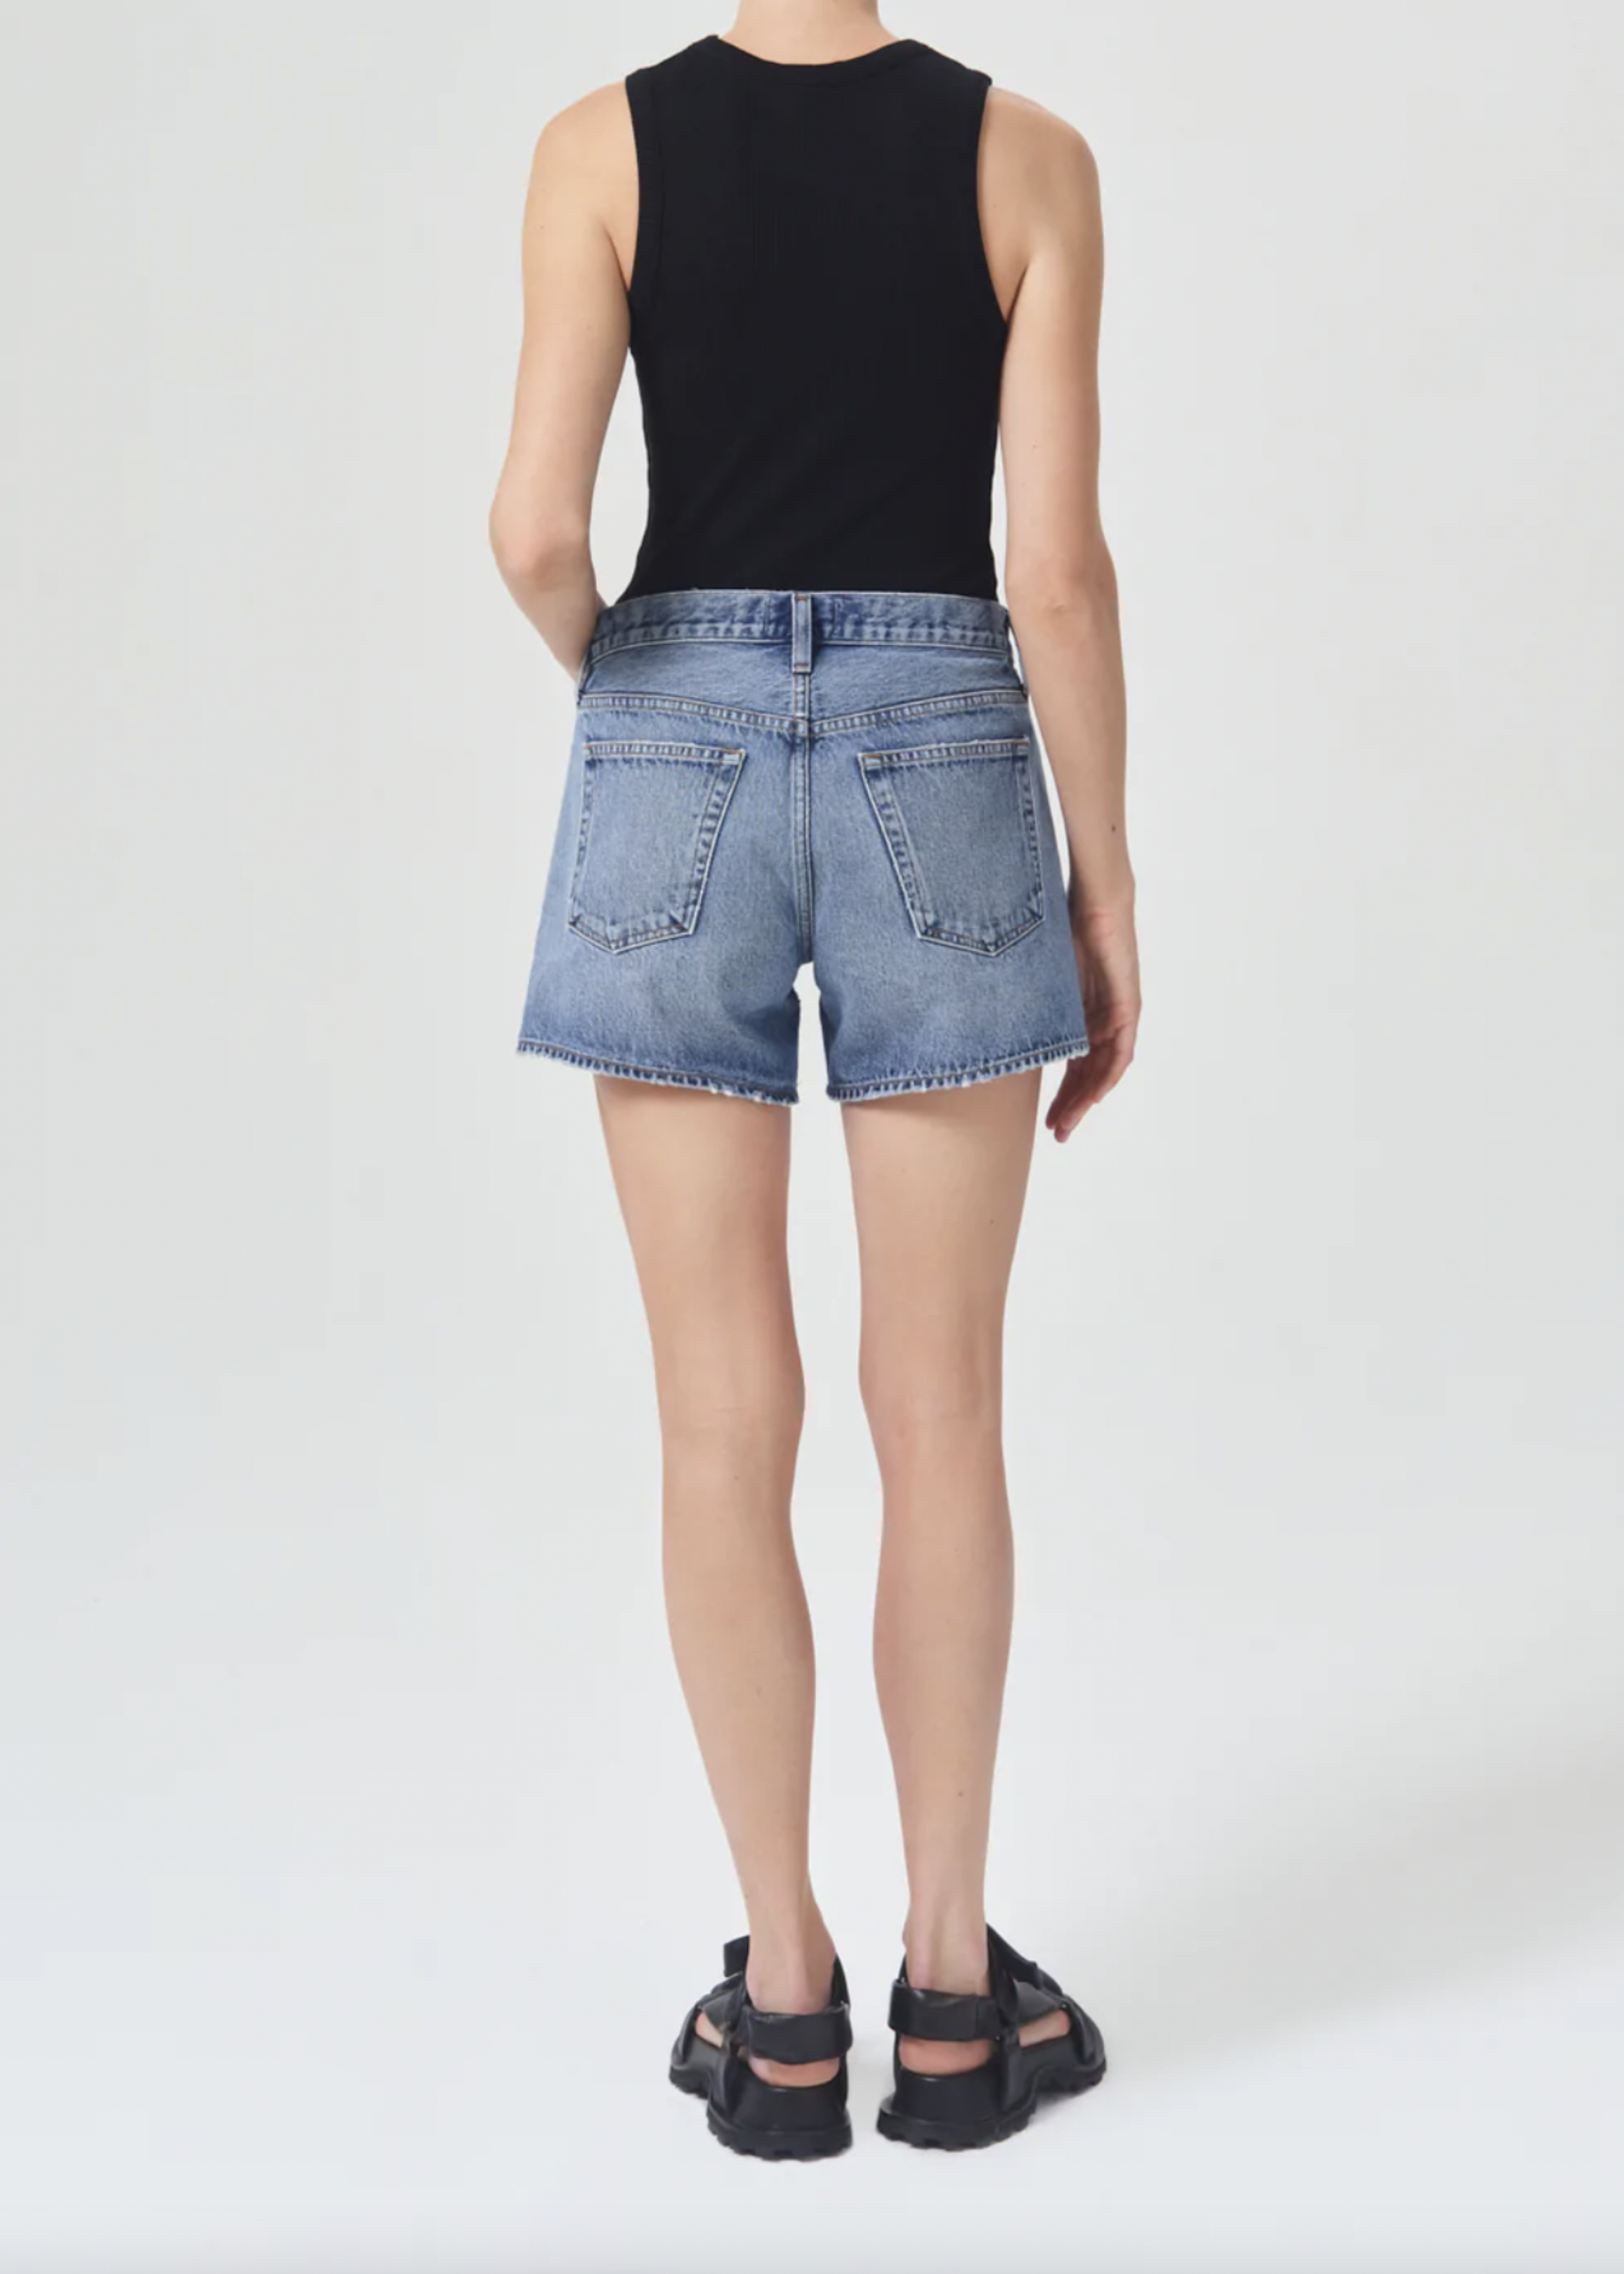 Elitaire Boutique Parker Long Short in Occurence